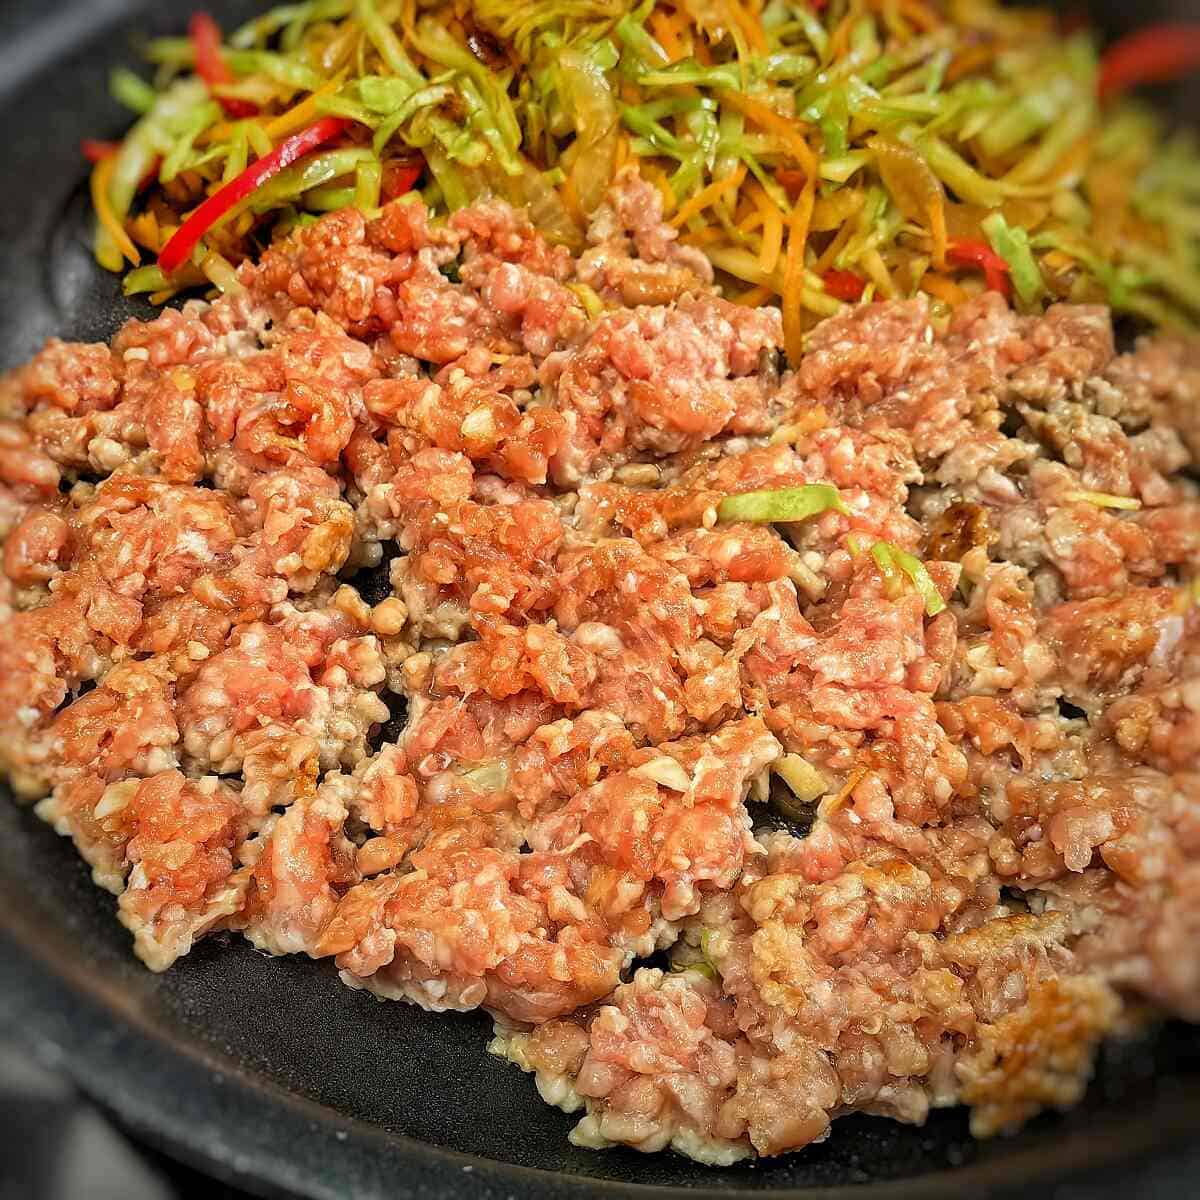 sauteing vegetables and ground pork in a pan